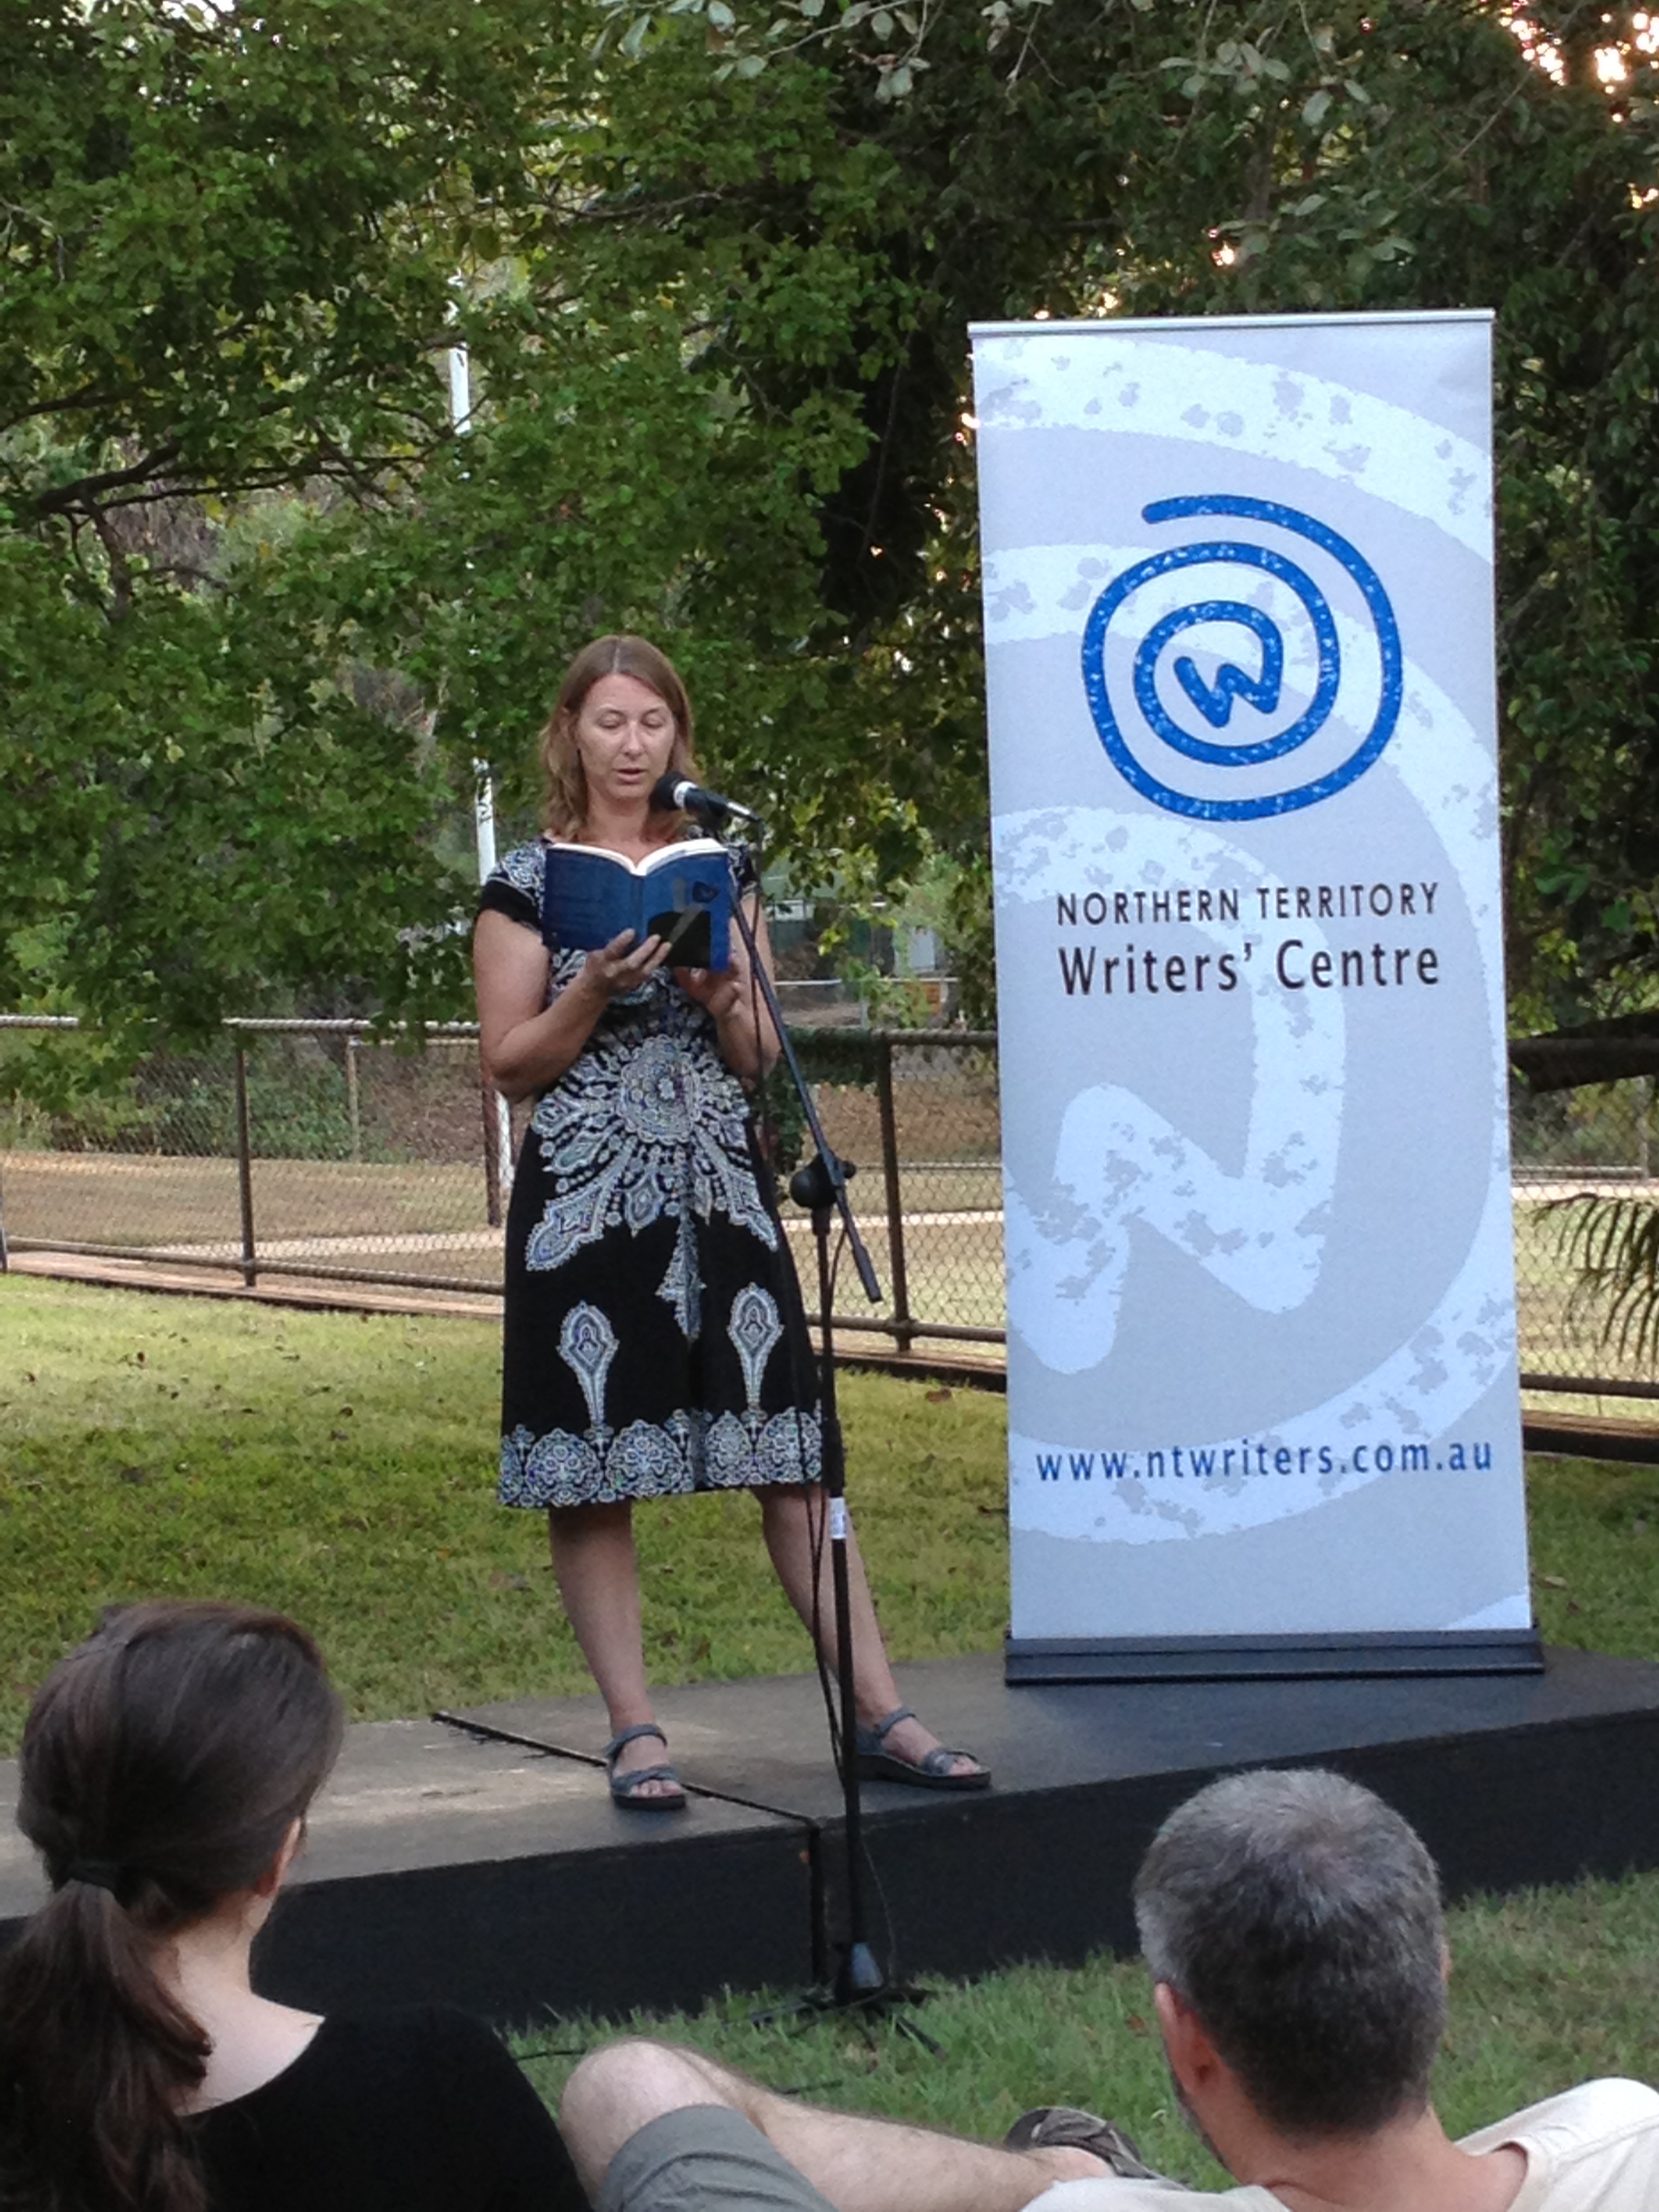 On Sunday 12 May 2013, Anna and Kim were both invited to participate in the Mother's Day reading at the NT Writers' Centre